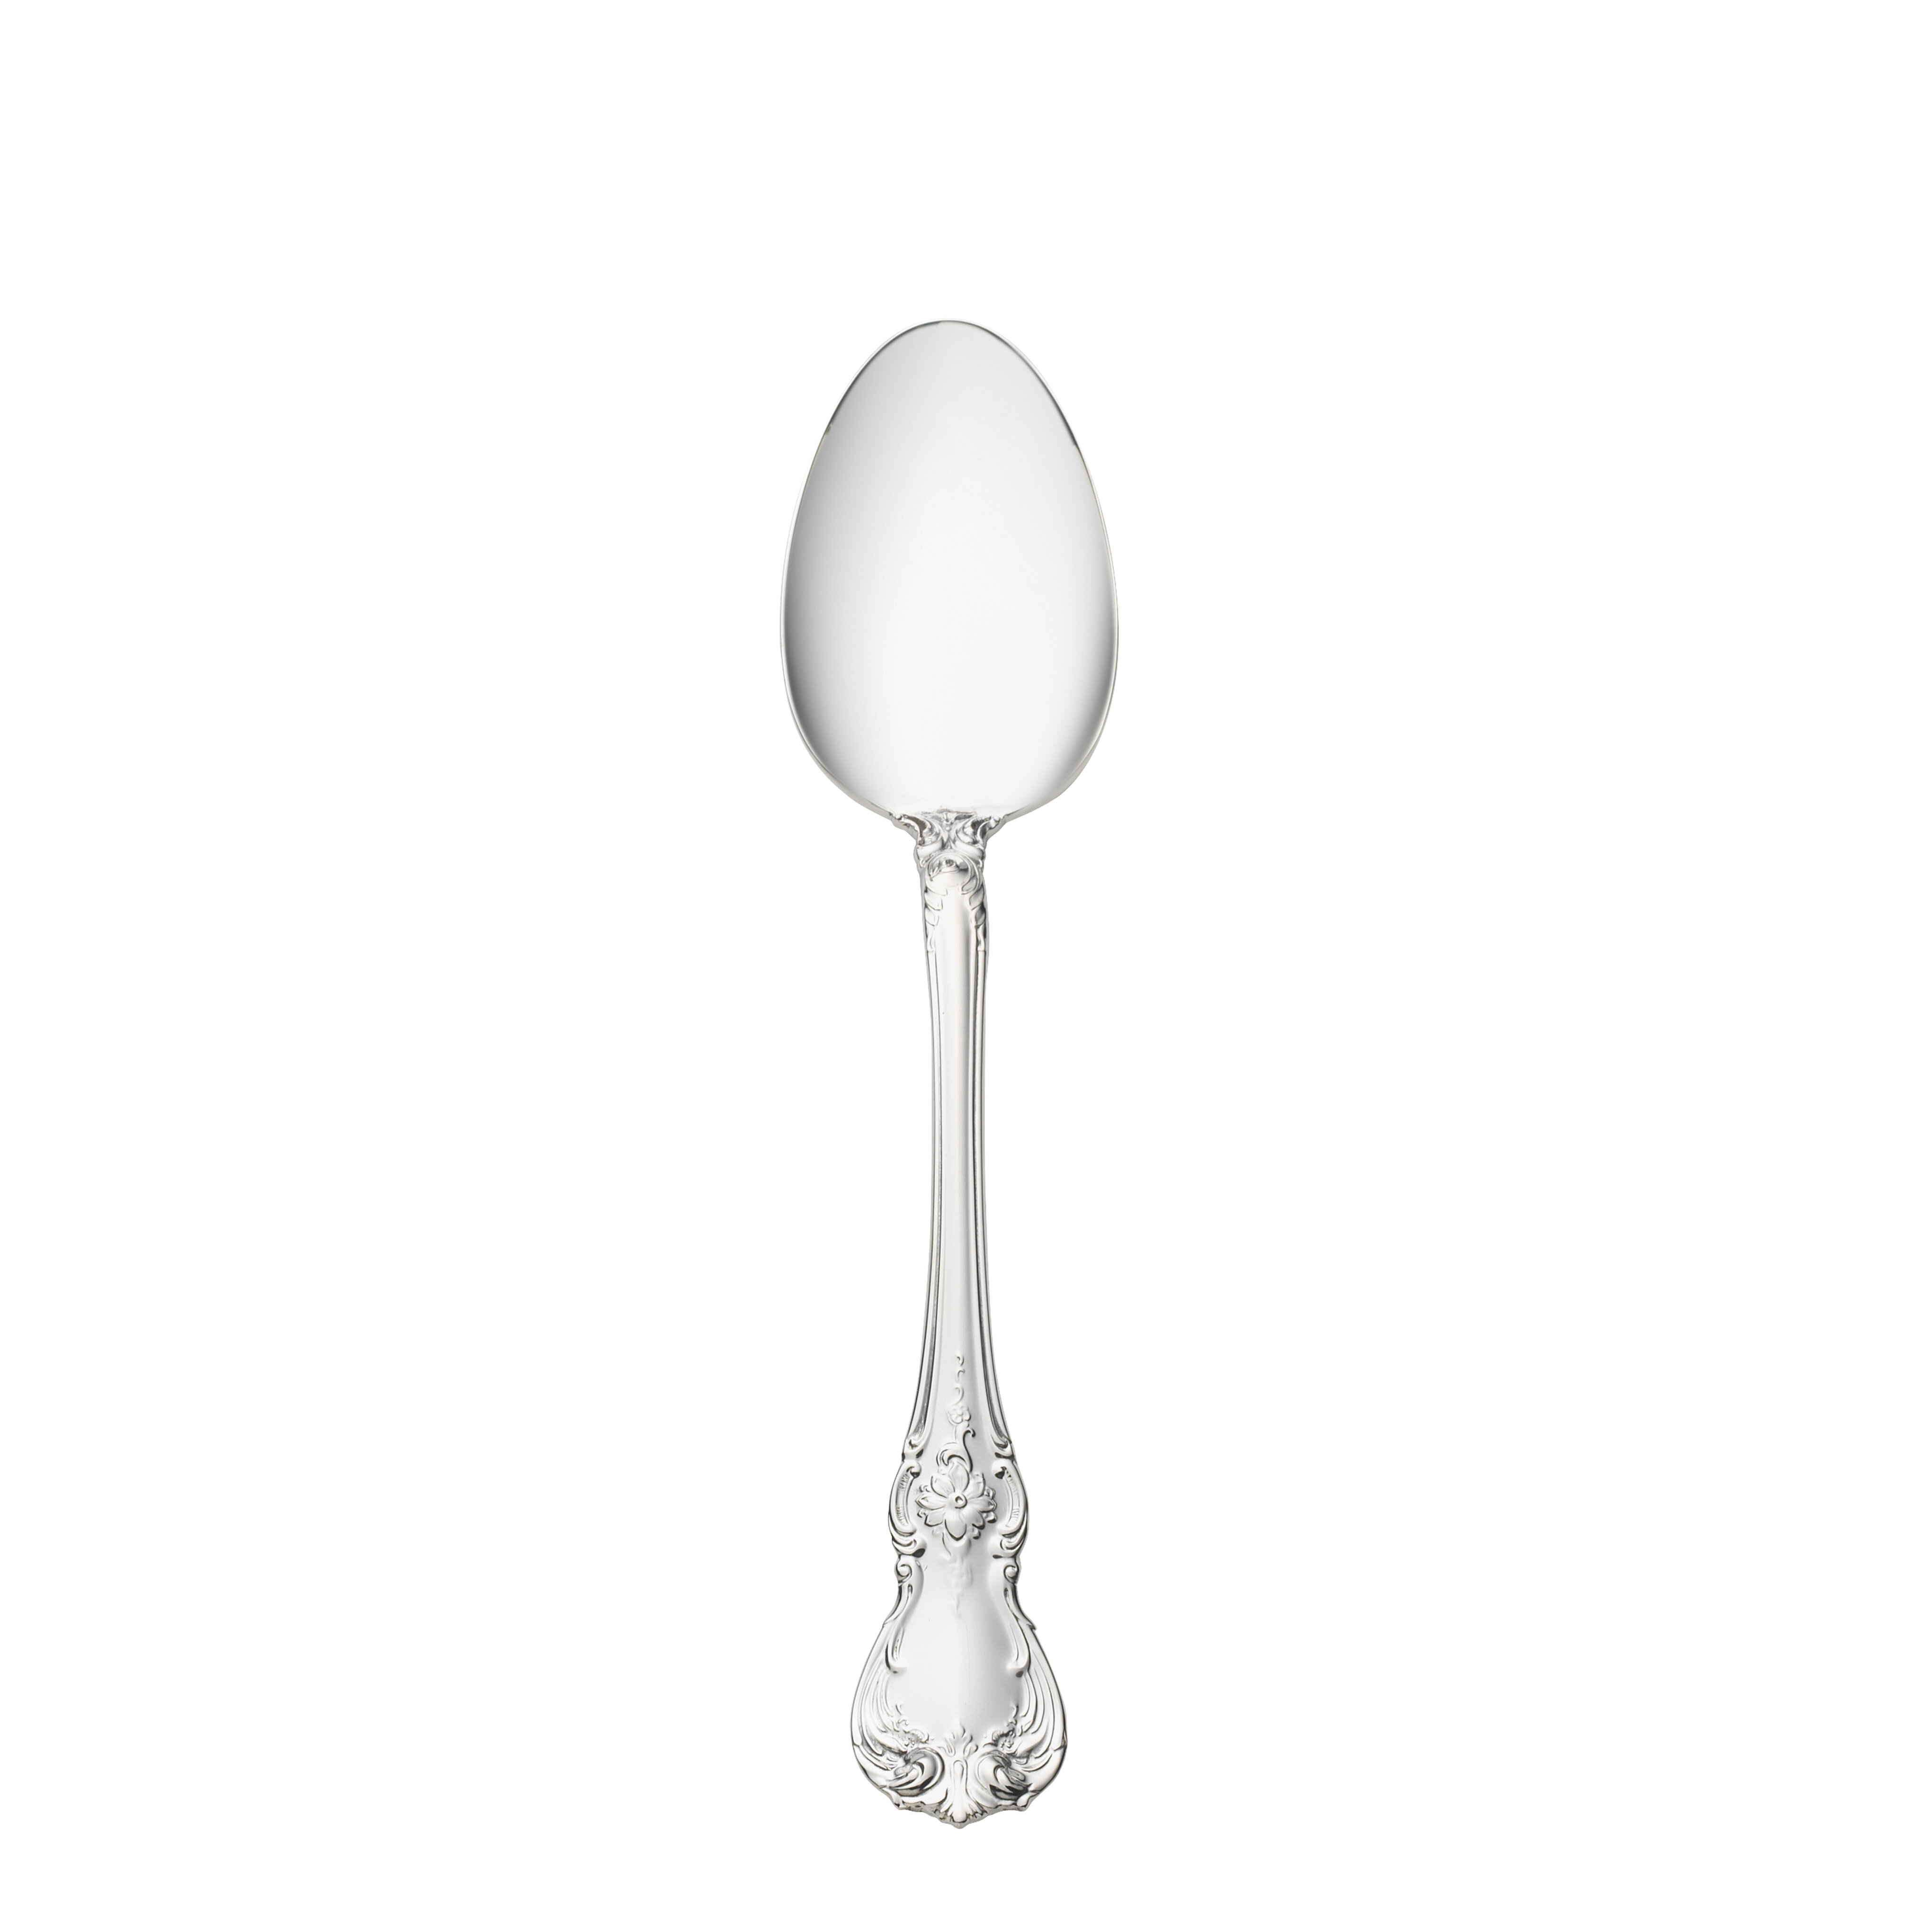 Towle Sterling Silver Peachtree Manor Large Spoon 